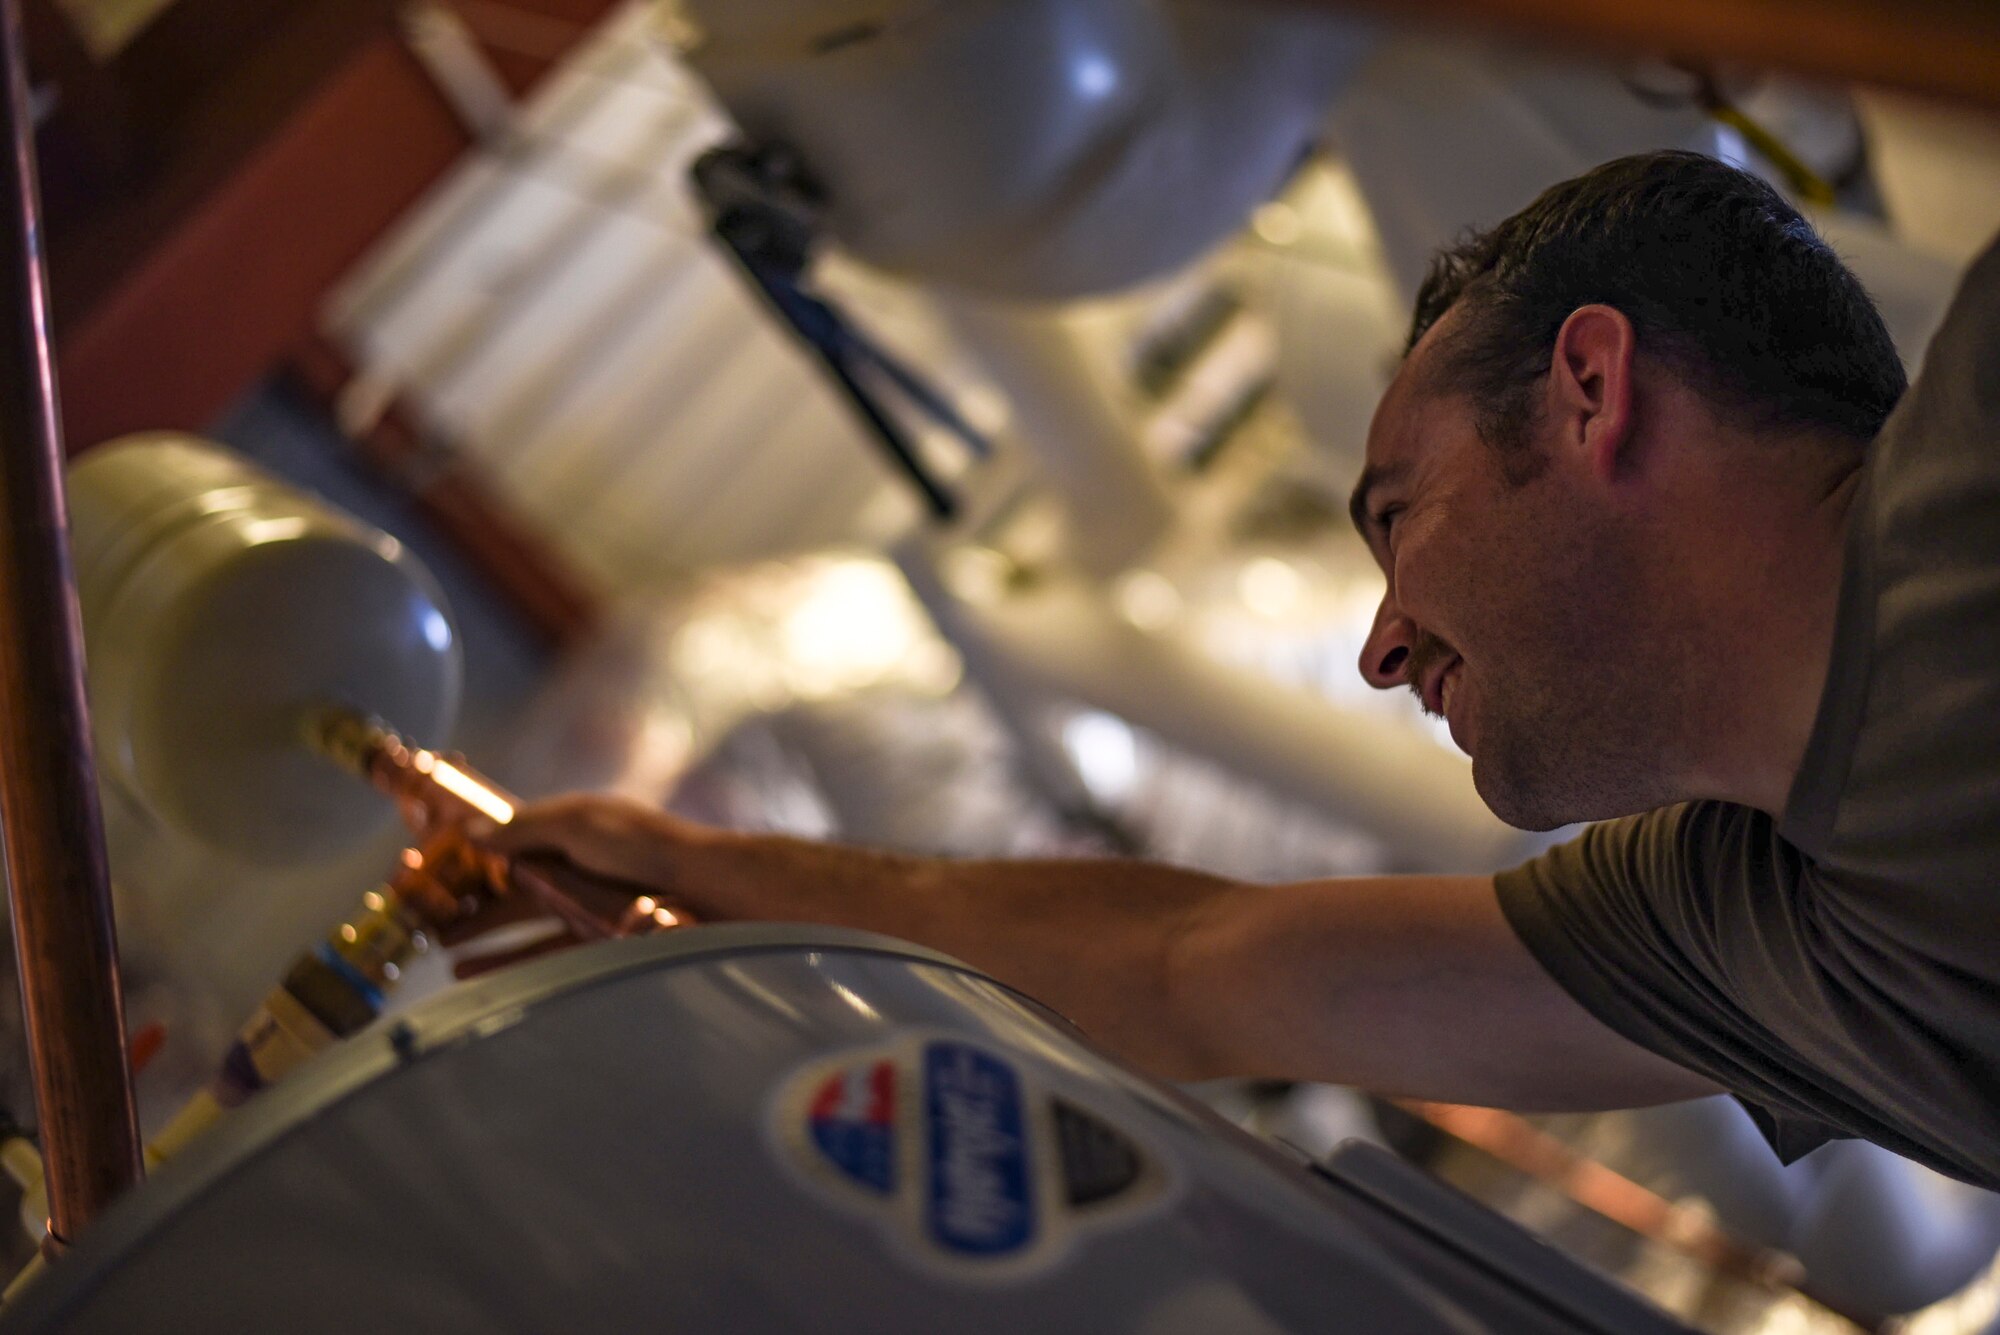 Staff Sgt. Daniel Champion, 23d Civil Engineer Squadron (CES) water and fuel systems maintenance craftsman, places an expansion tank, on a water heater, July 2, 2019, at Moody Air Force Base, Ga. Airmen from the 23d CES Water and Fuels Systems Maintenance are on-call 24/7 to sustain and maintain the base, water, sewer and gas lines and upkeep of the 696 facilities with water and fuel infrastructure. (U.S. Air Force photo by Airman 1st Class Taryn Butler)